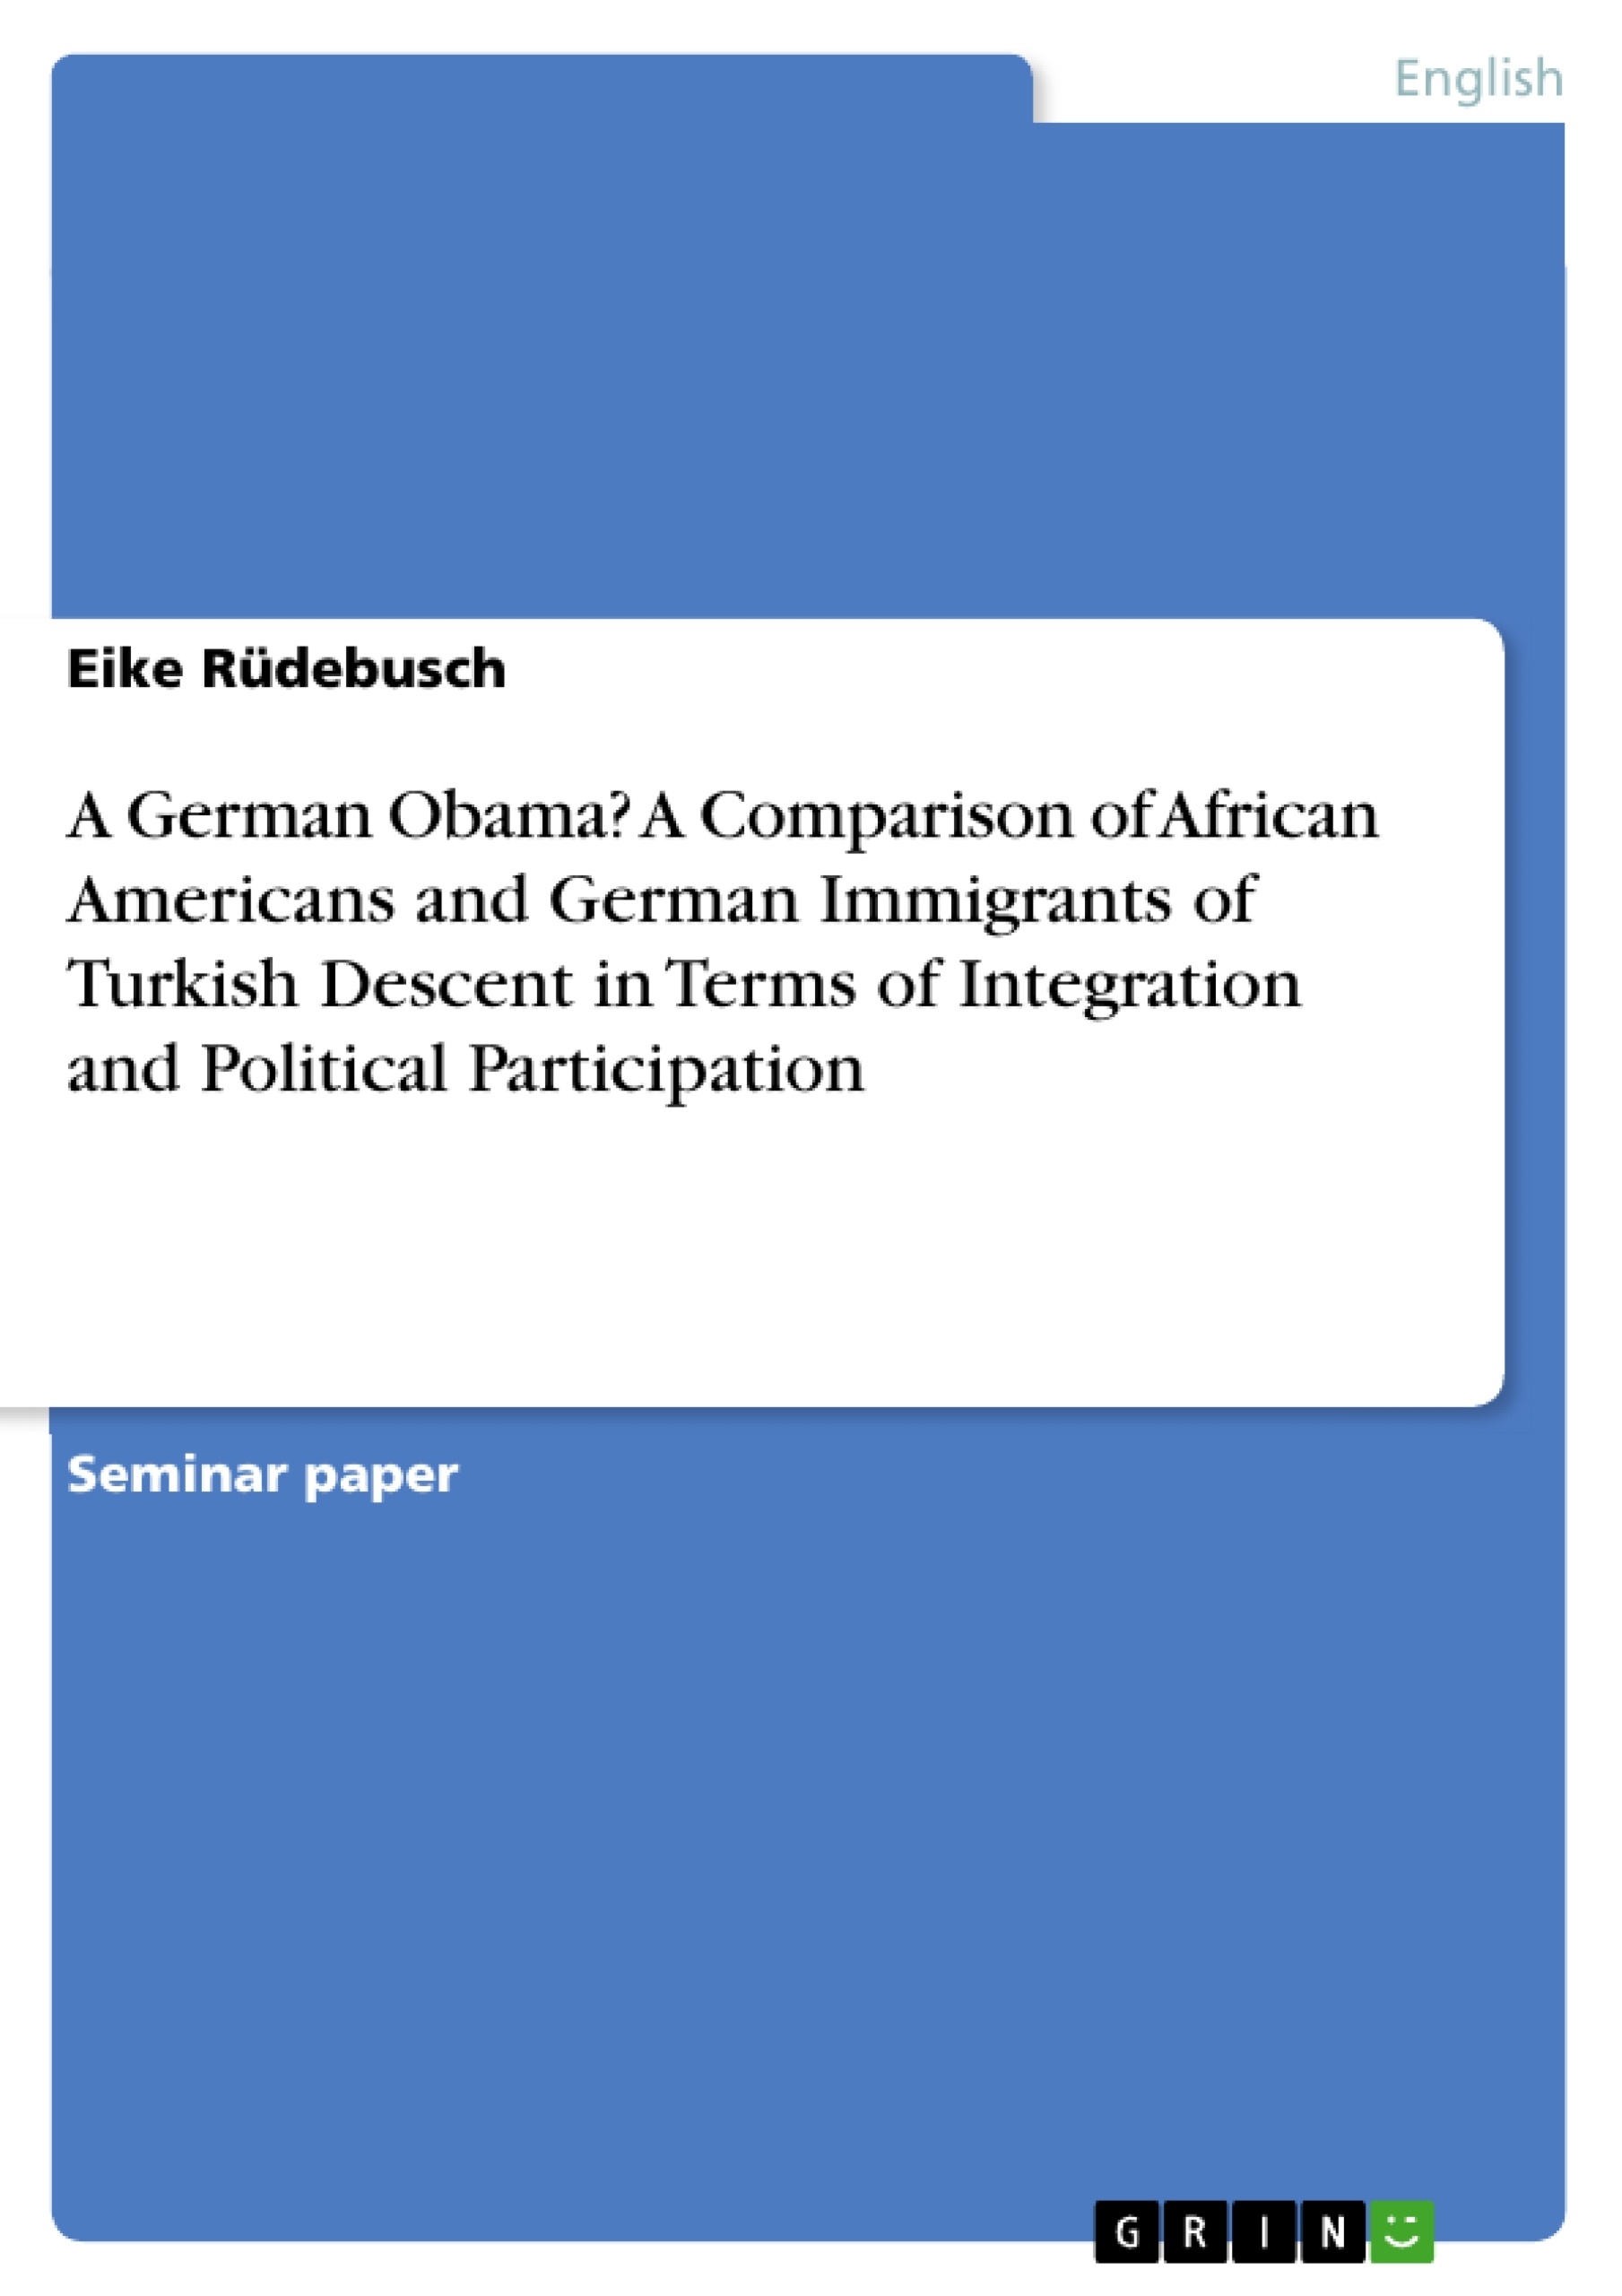 Title: A German Obama? A Comparison of African Americans and German Immigrants of Turkish Descent in Terms of Integration and Political Participation 